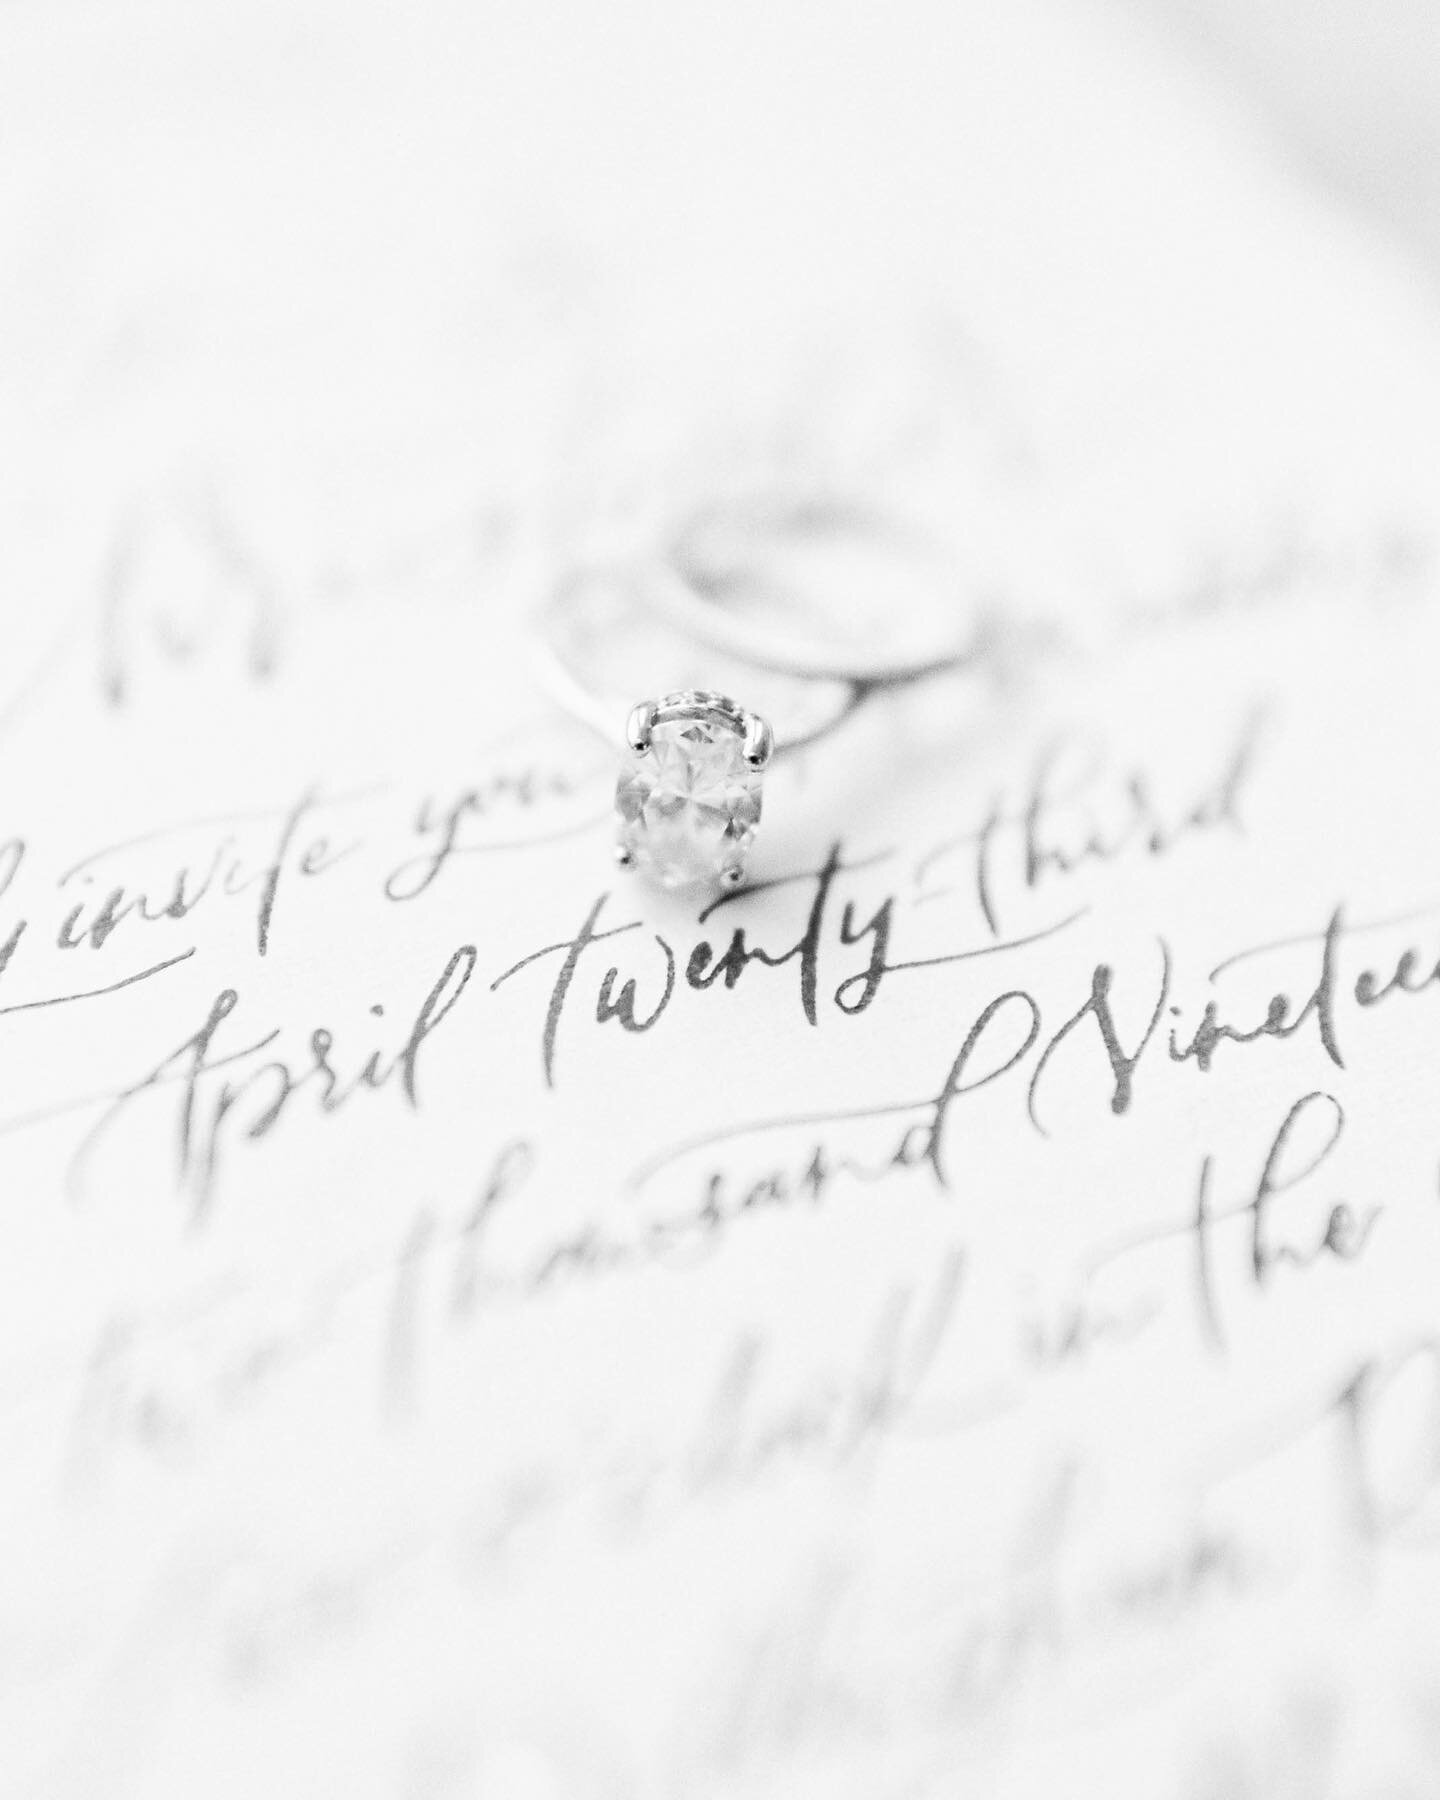 Rings On Paper .|. A Simple &amp; Classic Approach To Detailing Your Finest Memories&hellip;
⠀⠀⠀⠀⠀⠀⠀⠀⠀
As Seen On: @thewhitewren &amp; @friartux 
⠀⠀⠀⠀⠀⠀⠀⠀⠀
@dillinghamranch
@amoretteevents 
@petal.rs 
@michellereneecalligraphy
@cakeworks_hi
@revealha